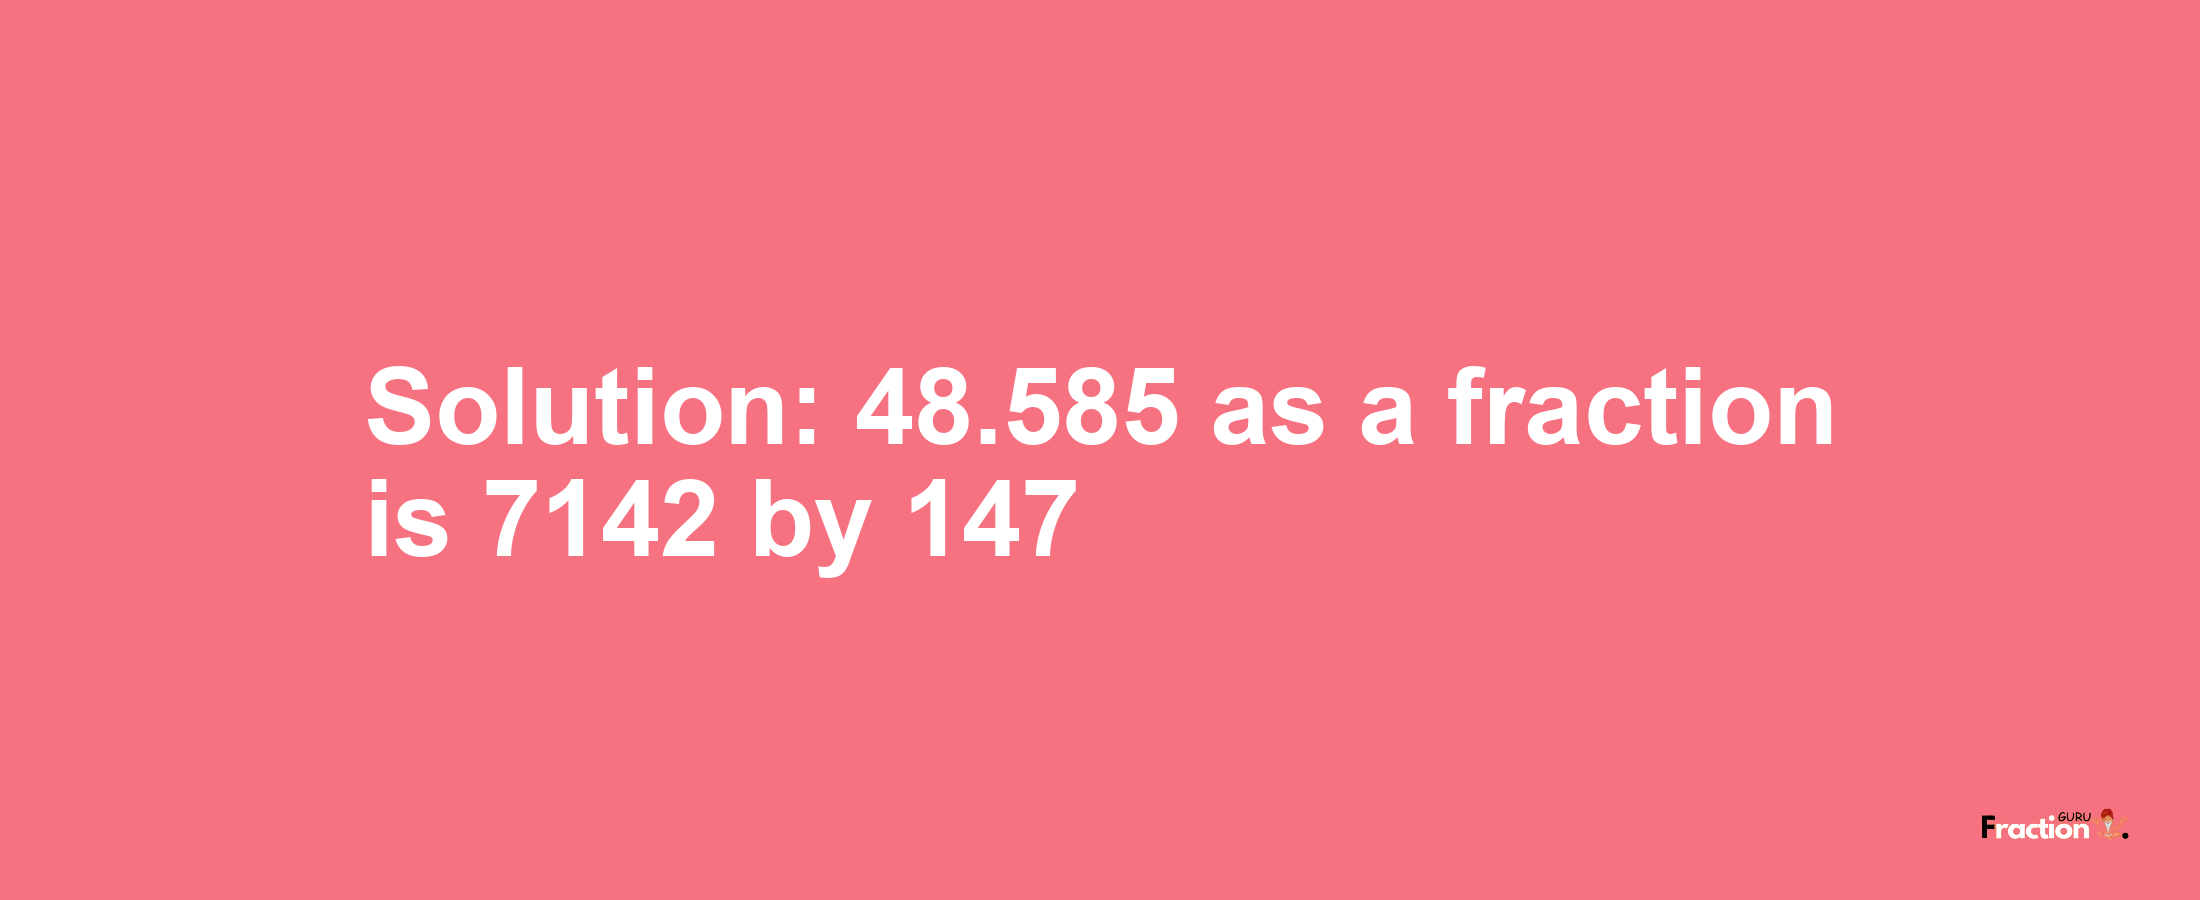 Solution:48.585 as a fraction is 7142/147